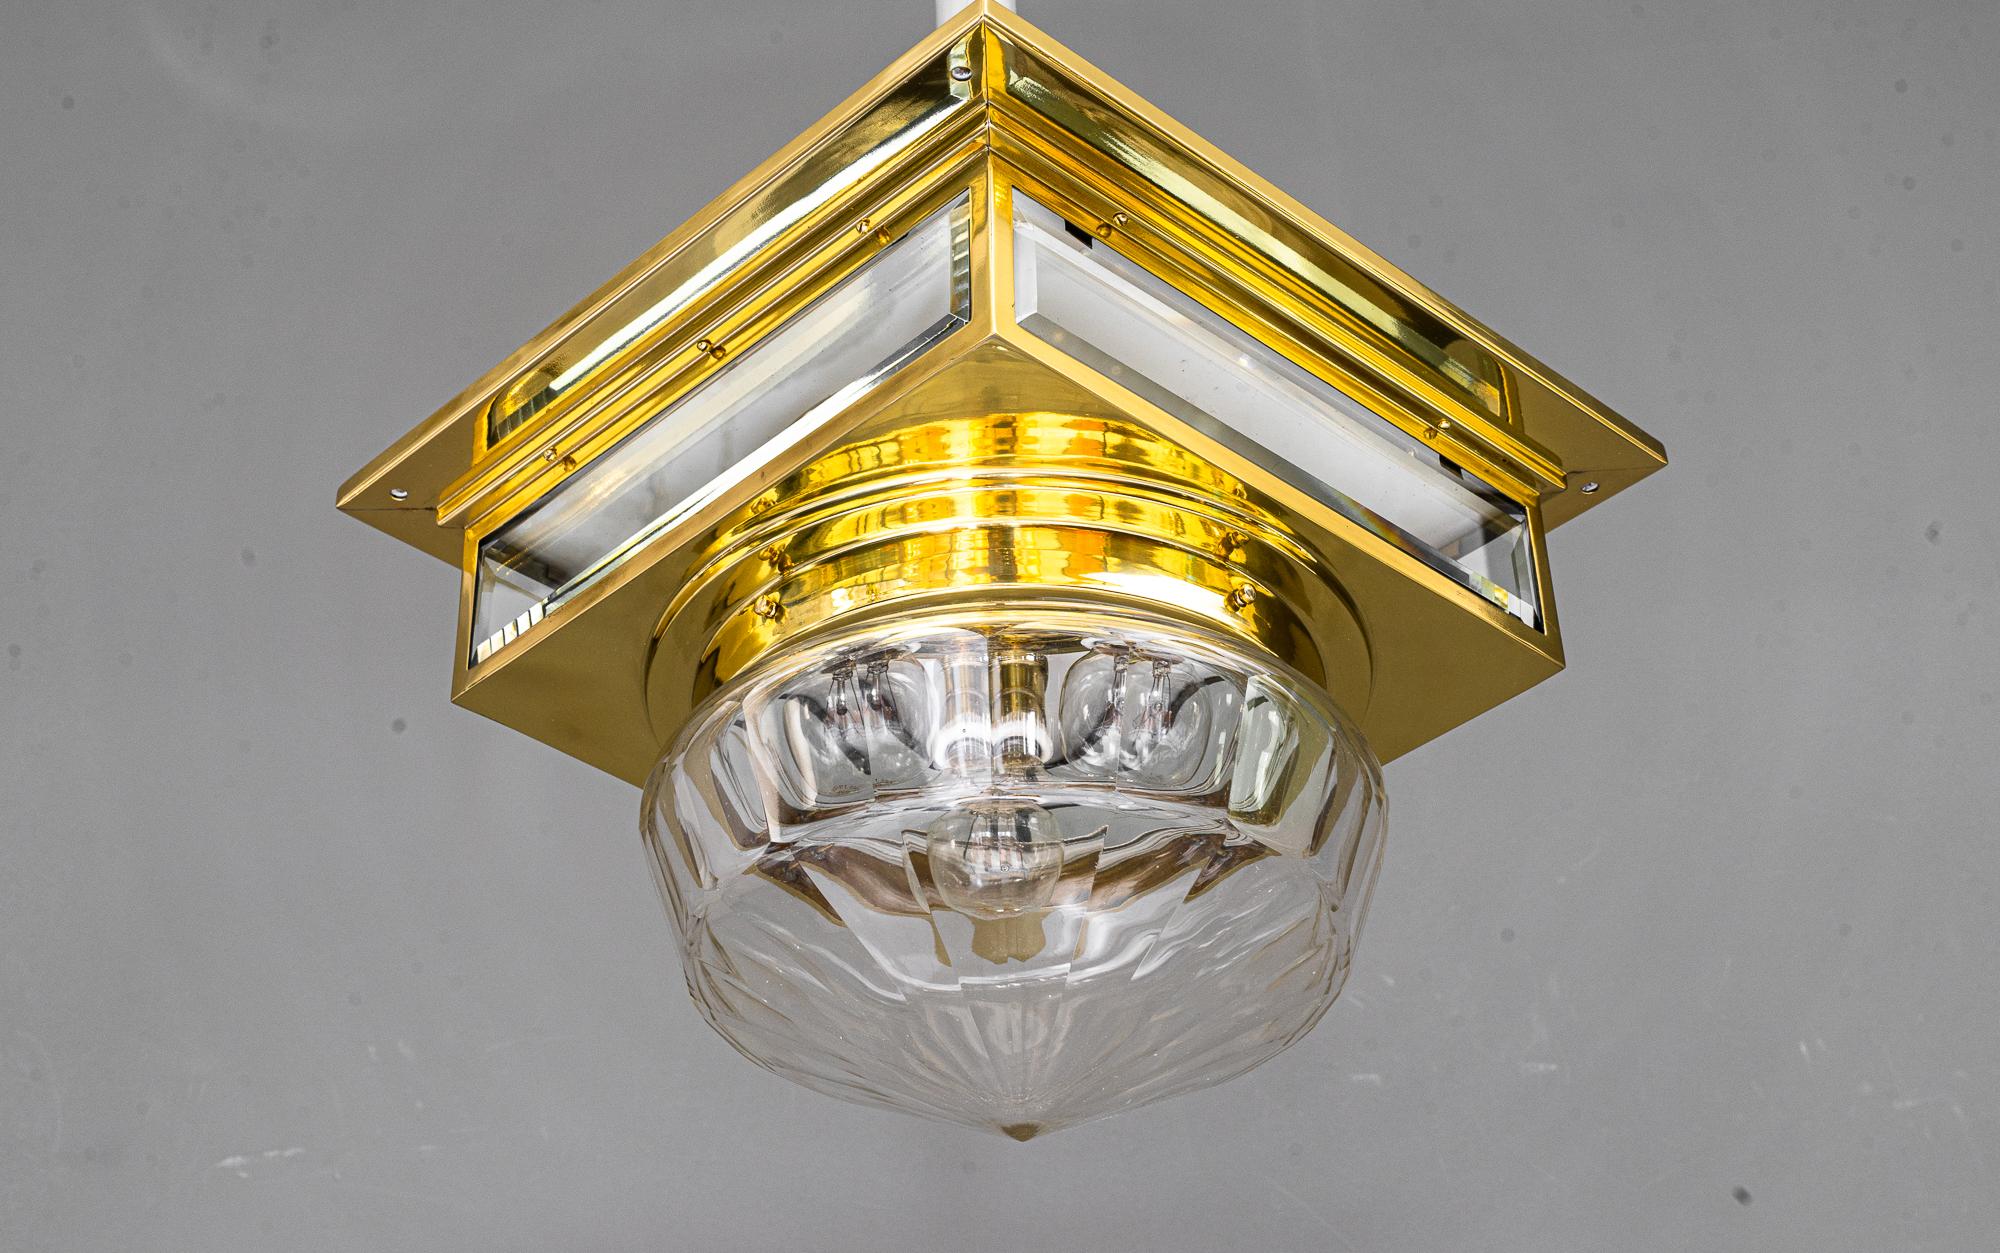 Lacquered Art Deco ceiling lamp with an hight quality glass shade around 1920s